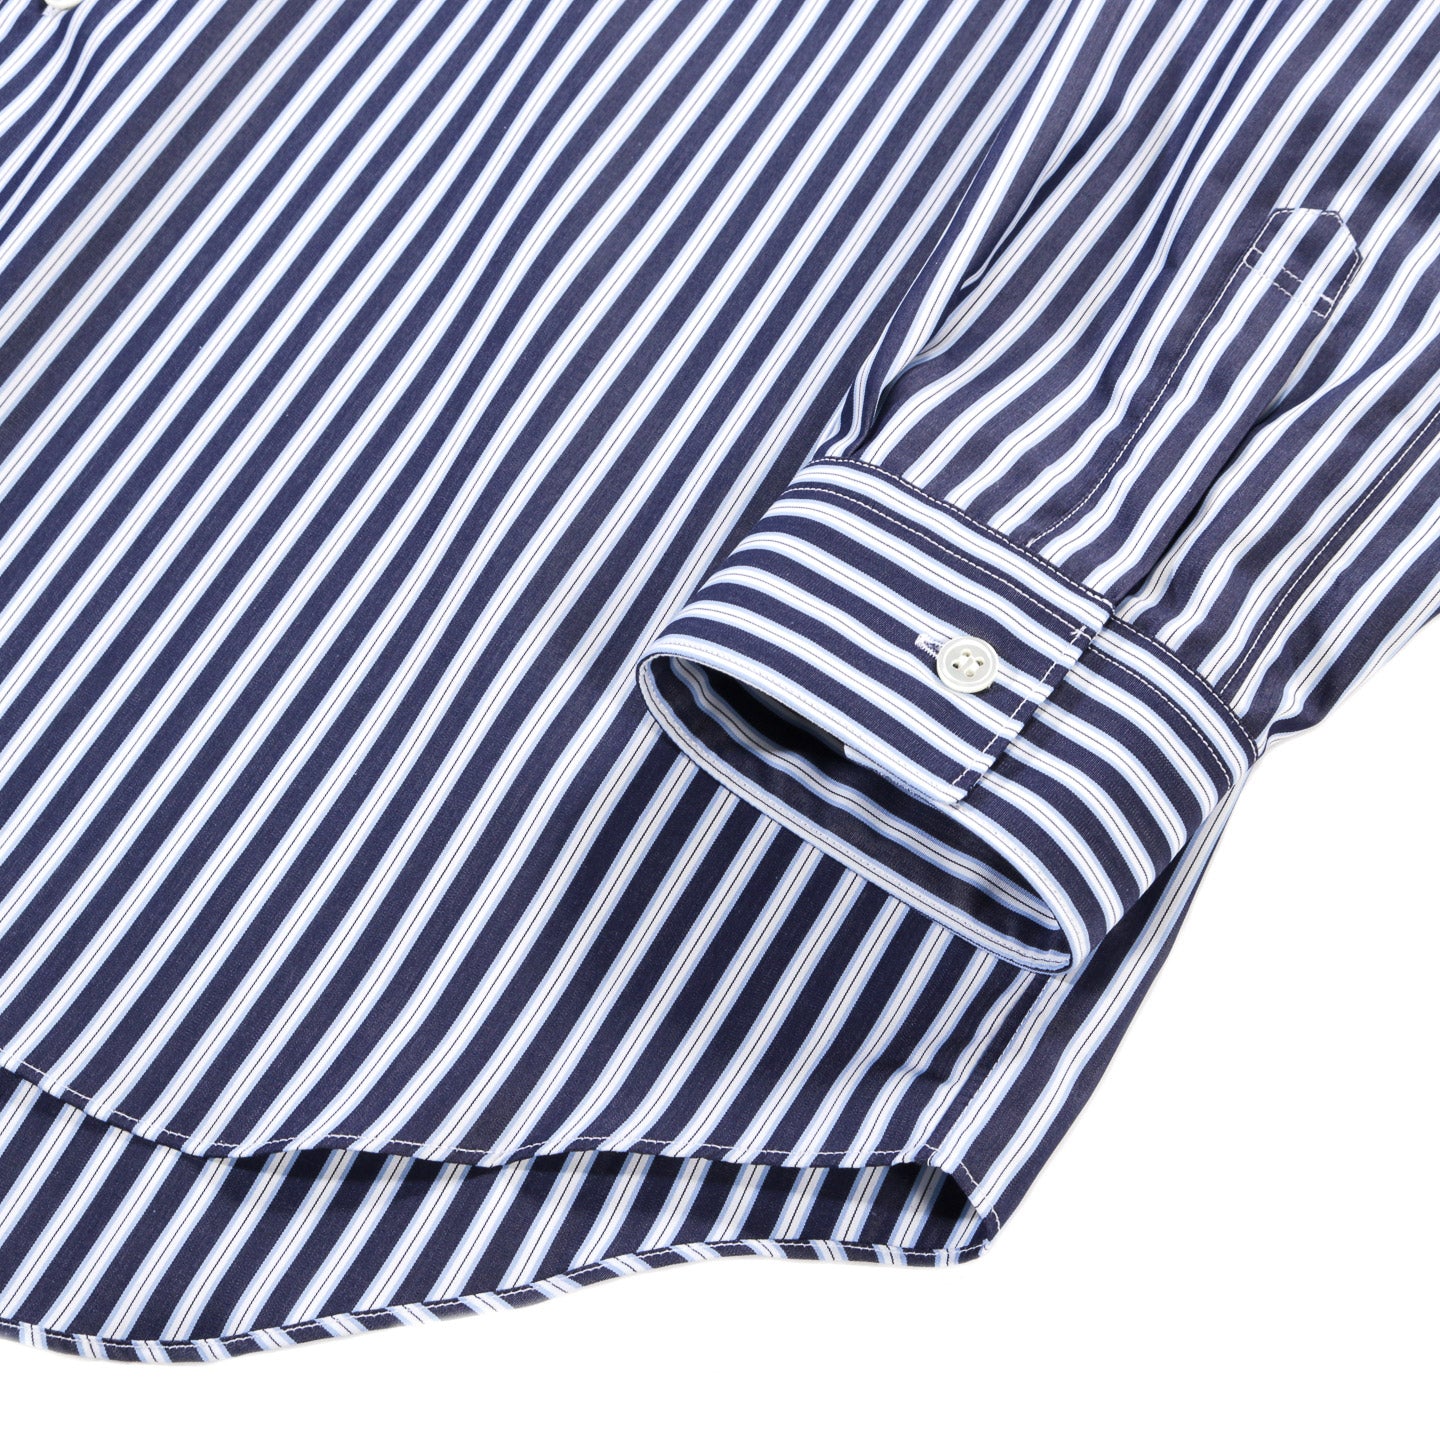 COMME DES GARCONS SHIRT FOREVER B219 WIDE CLASSIC ROUNDED COLLAR STRIPE 3